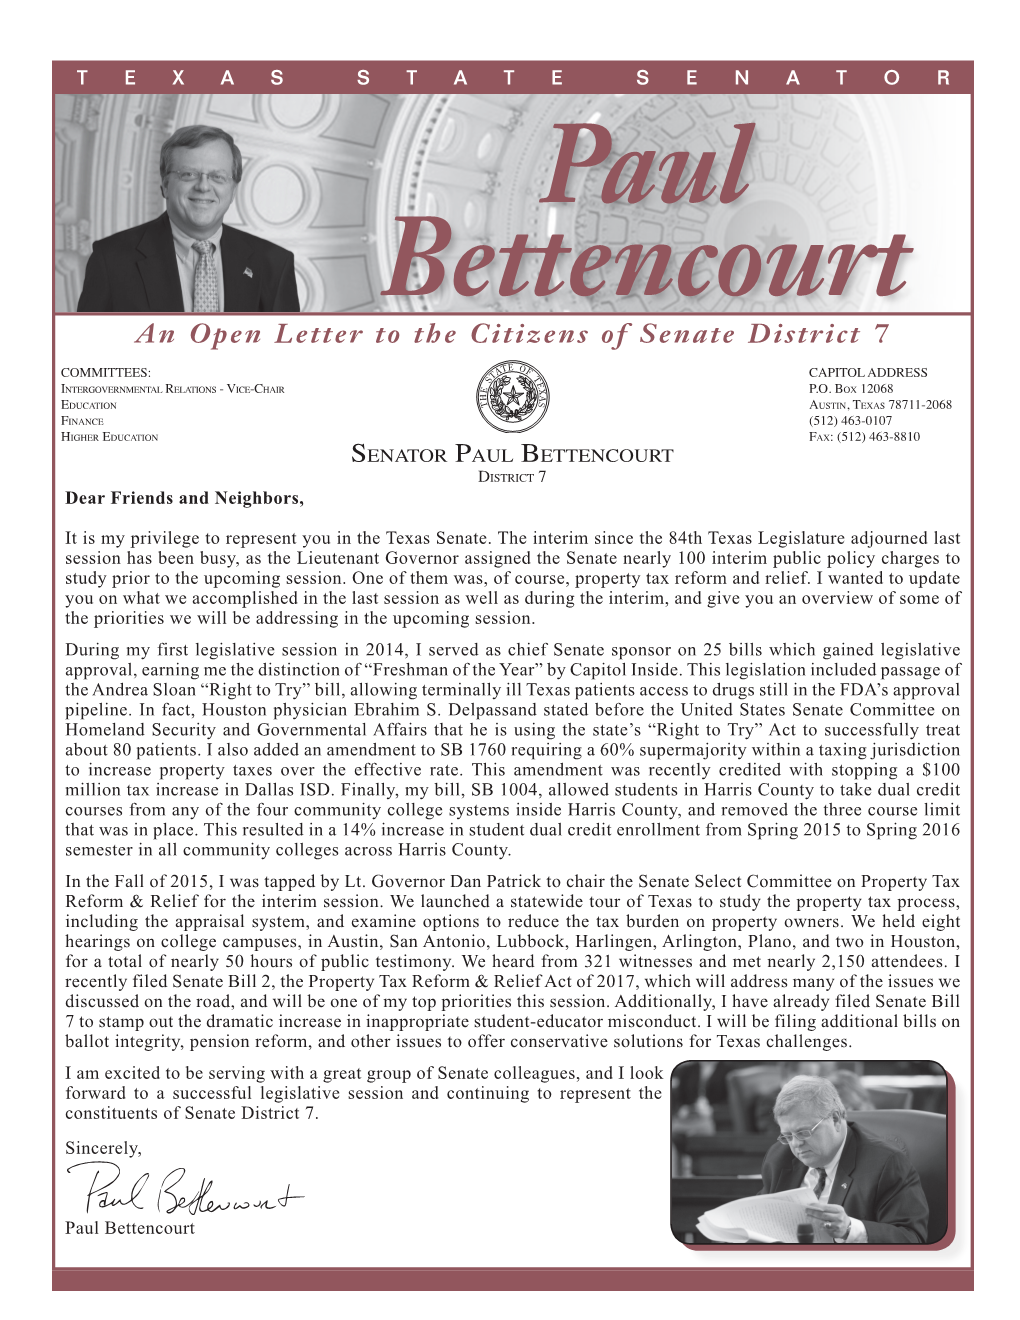 Paul Bettencourt an Open Letter to the Citizens of Senate District 7